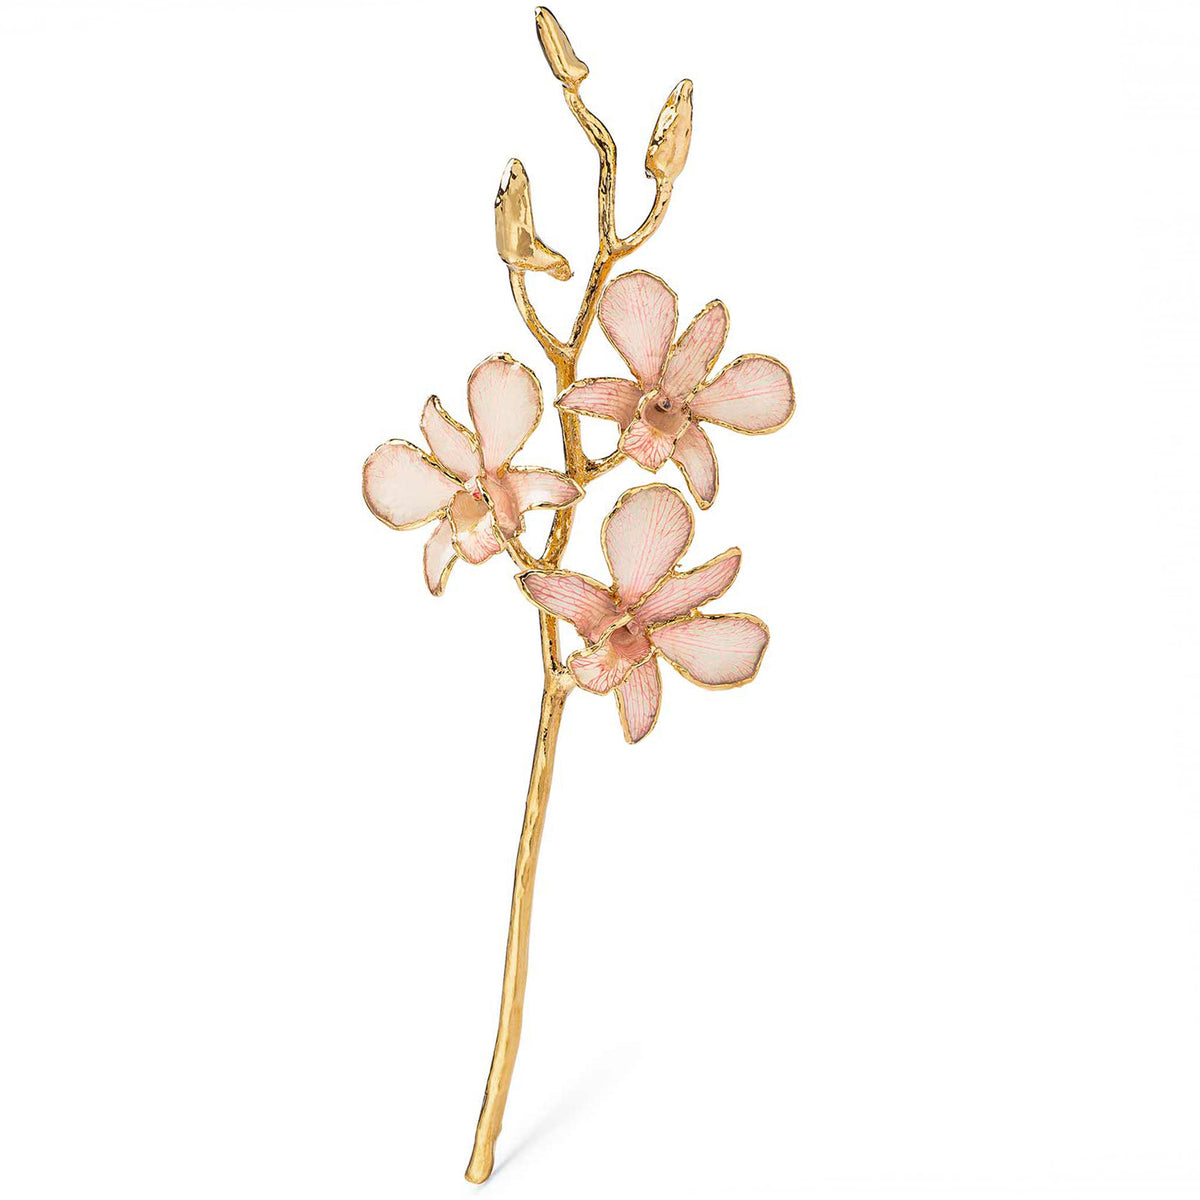 24K Gold Dipped Orchid in Pink Lace view of gold stem and flowers